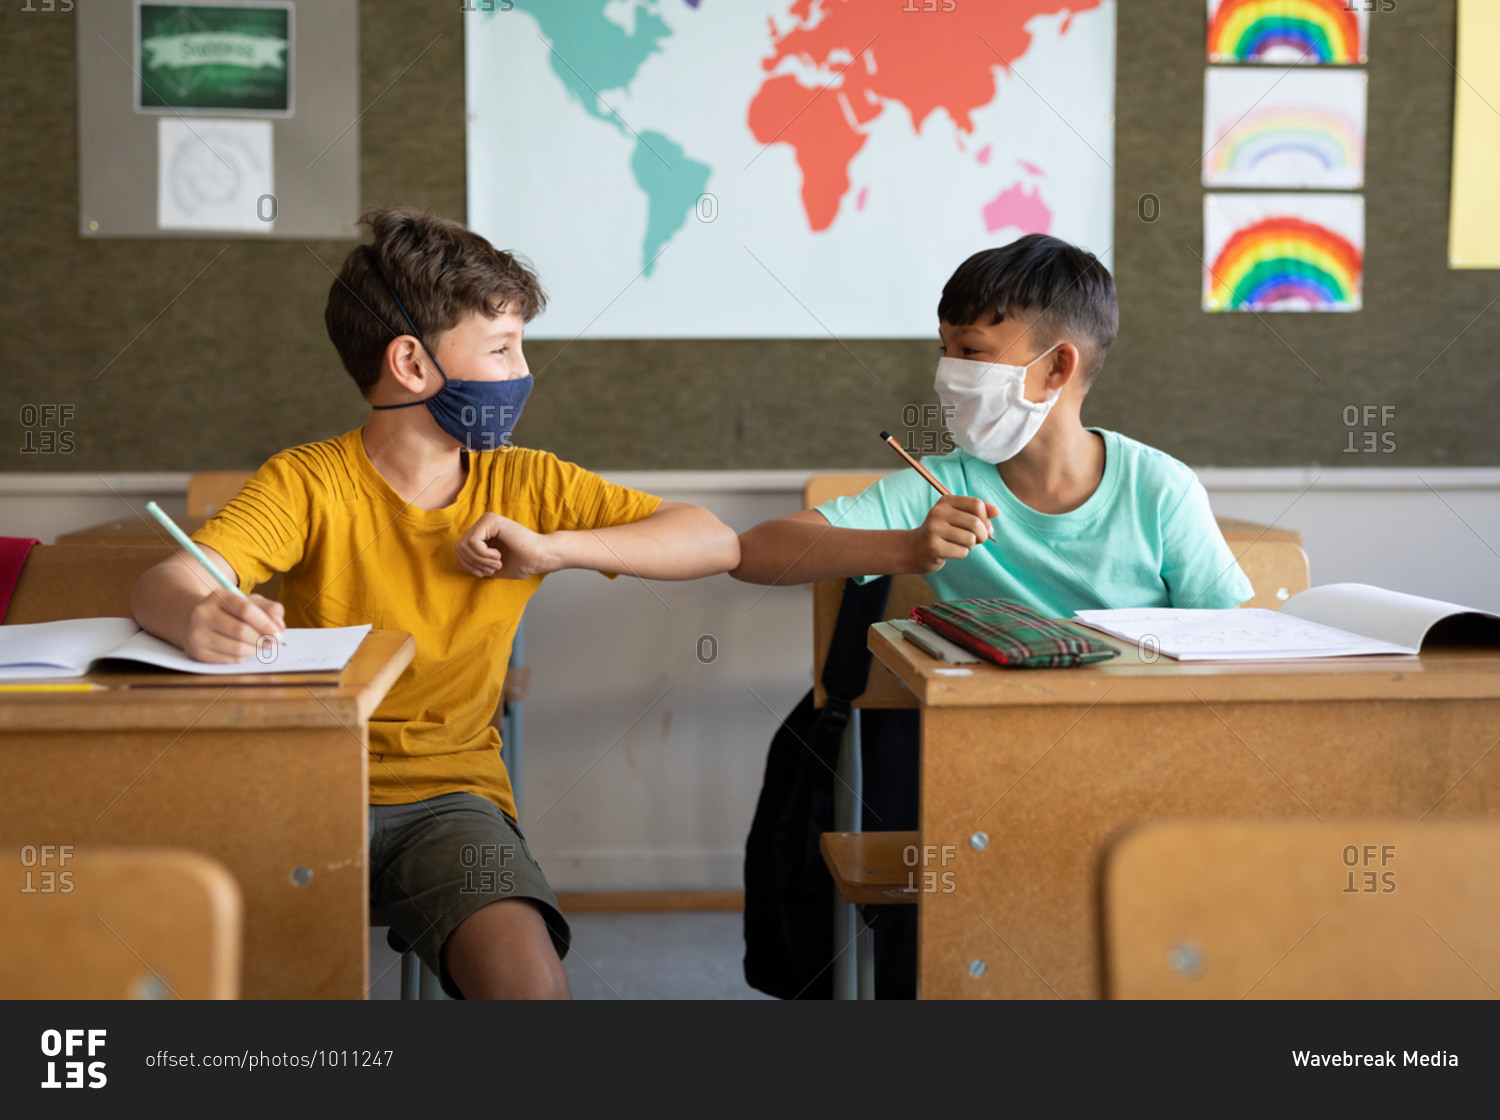 Two multi ethnic boys wearing face masks greeting each other by touching elbows in the classroom. Primary education social distancing health safety during Covid19 Coronavirus pandemic.